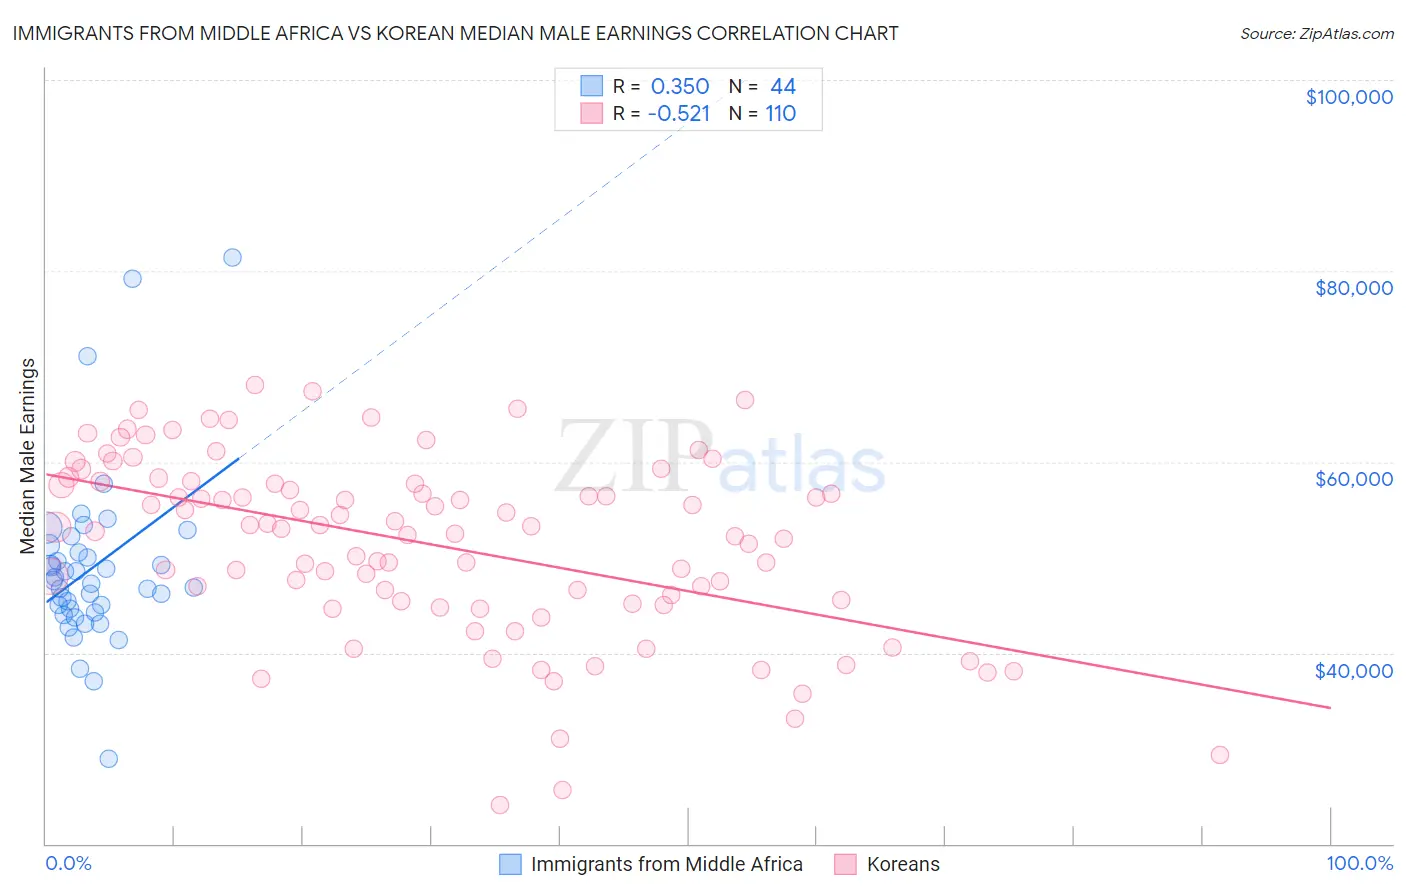 Immigrants from Middle Africa vs Korean Median Male Earnings